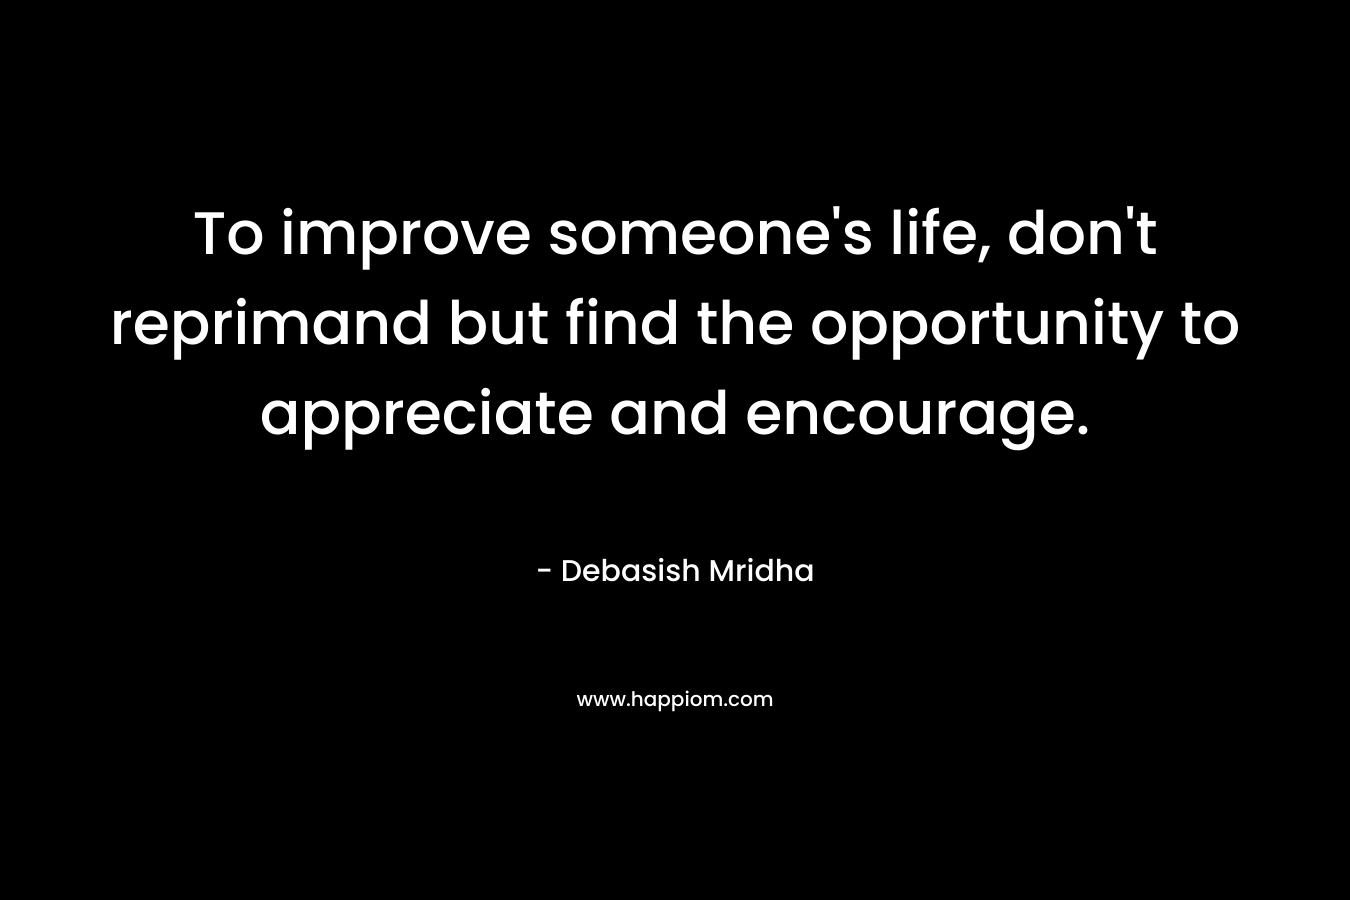 To improve someone’s life, don’t reprimand but find the opportunity to appreciate and encourage. – Debasish Mridha